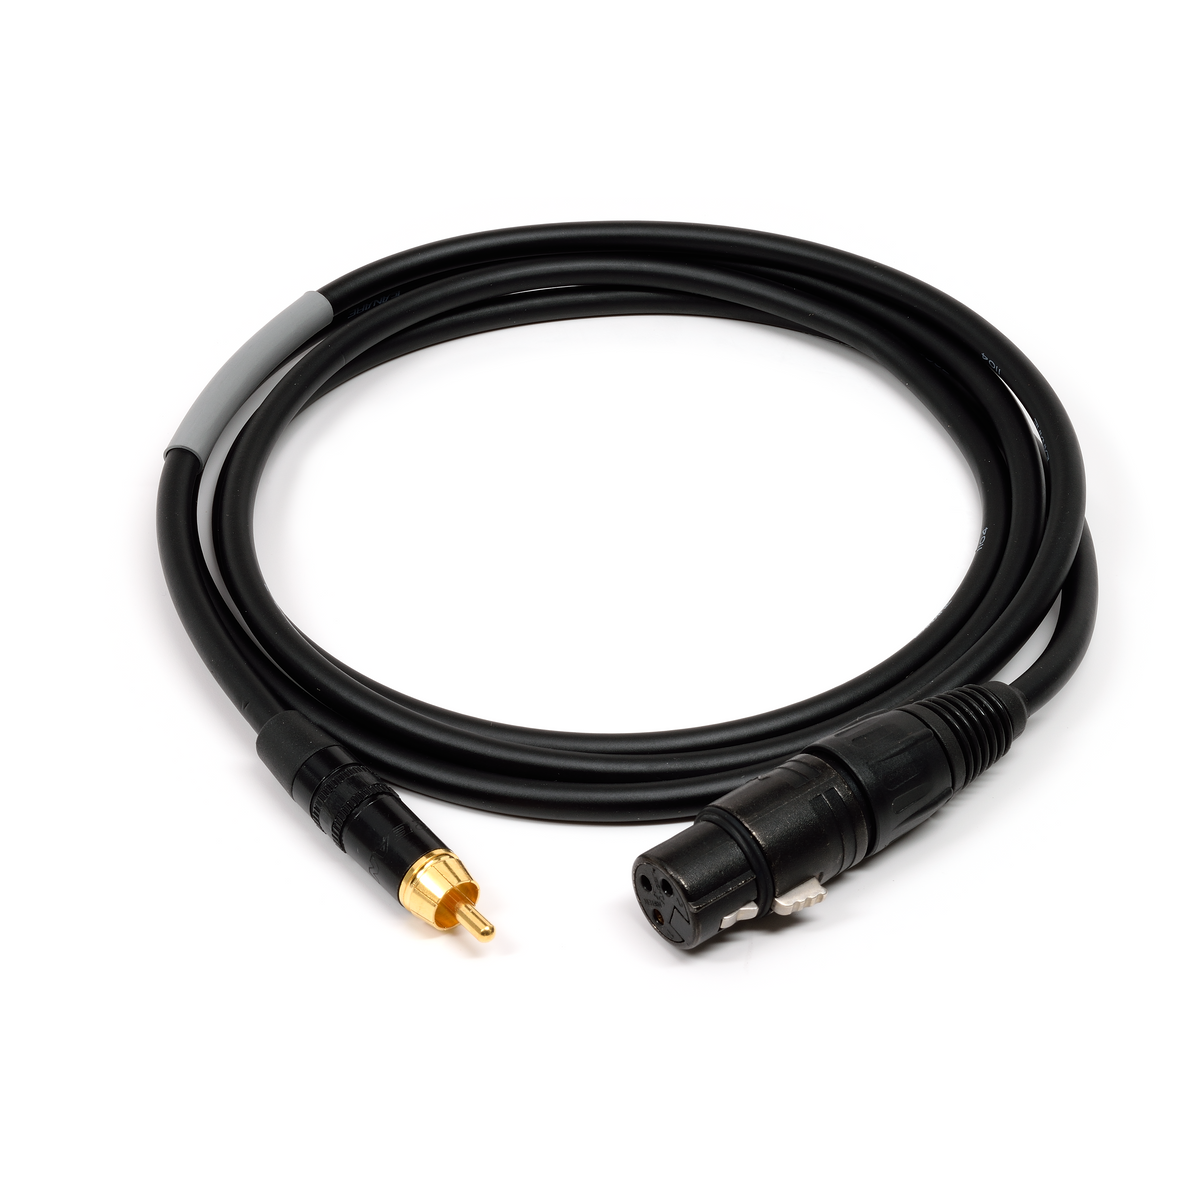 Benchmark BNC to RCA Coaxial Cable for Digital Audio or Analog Video